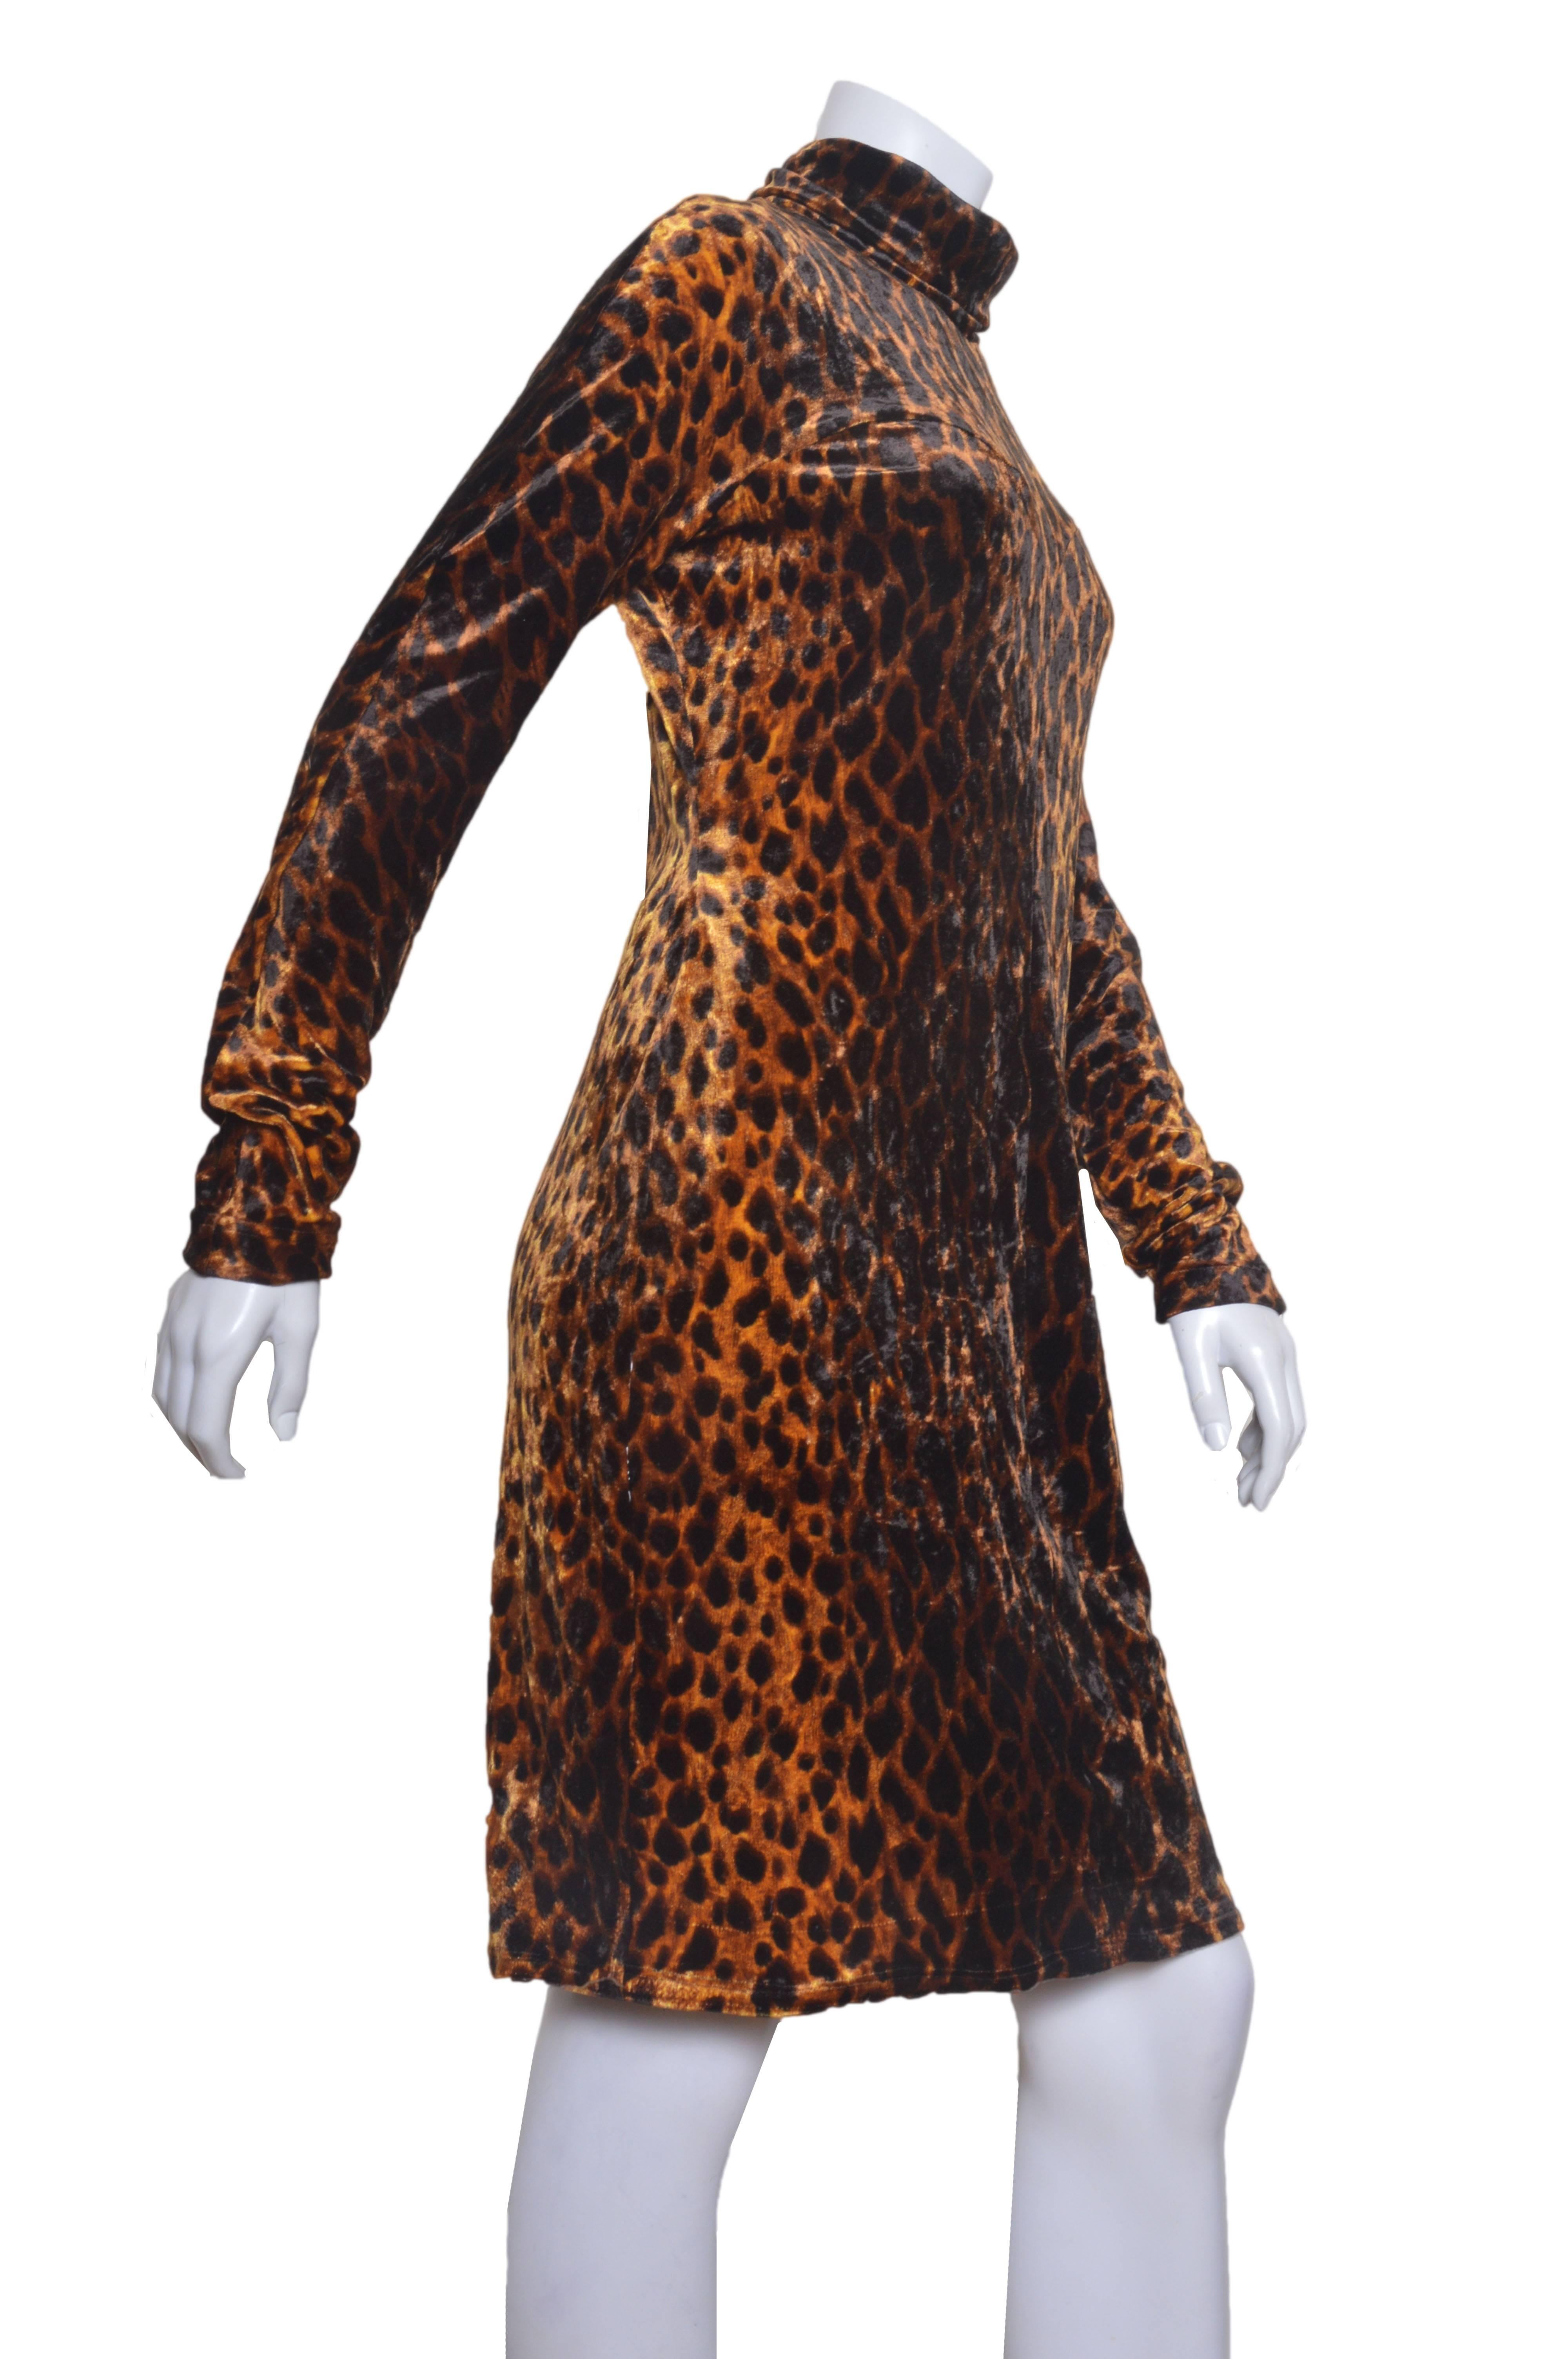 Vintage Versace Couture leopard print dress.
Circa 1992 (or early1990's.)
Stretchy velour.
High neck, hourglass shape.
Back zipper.
Tagged a size 46.